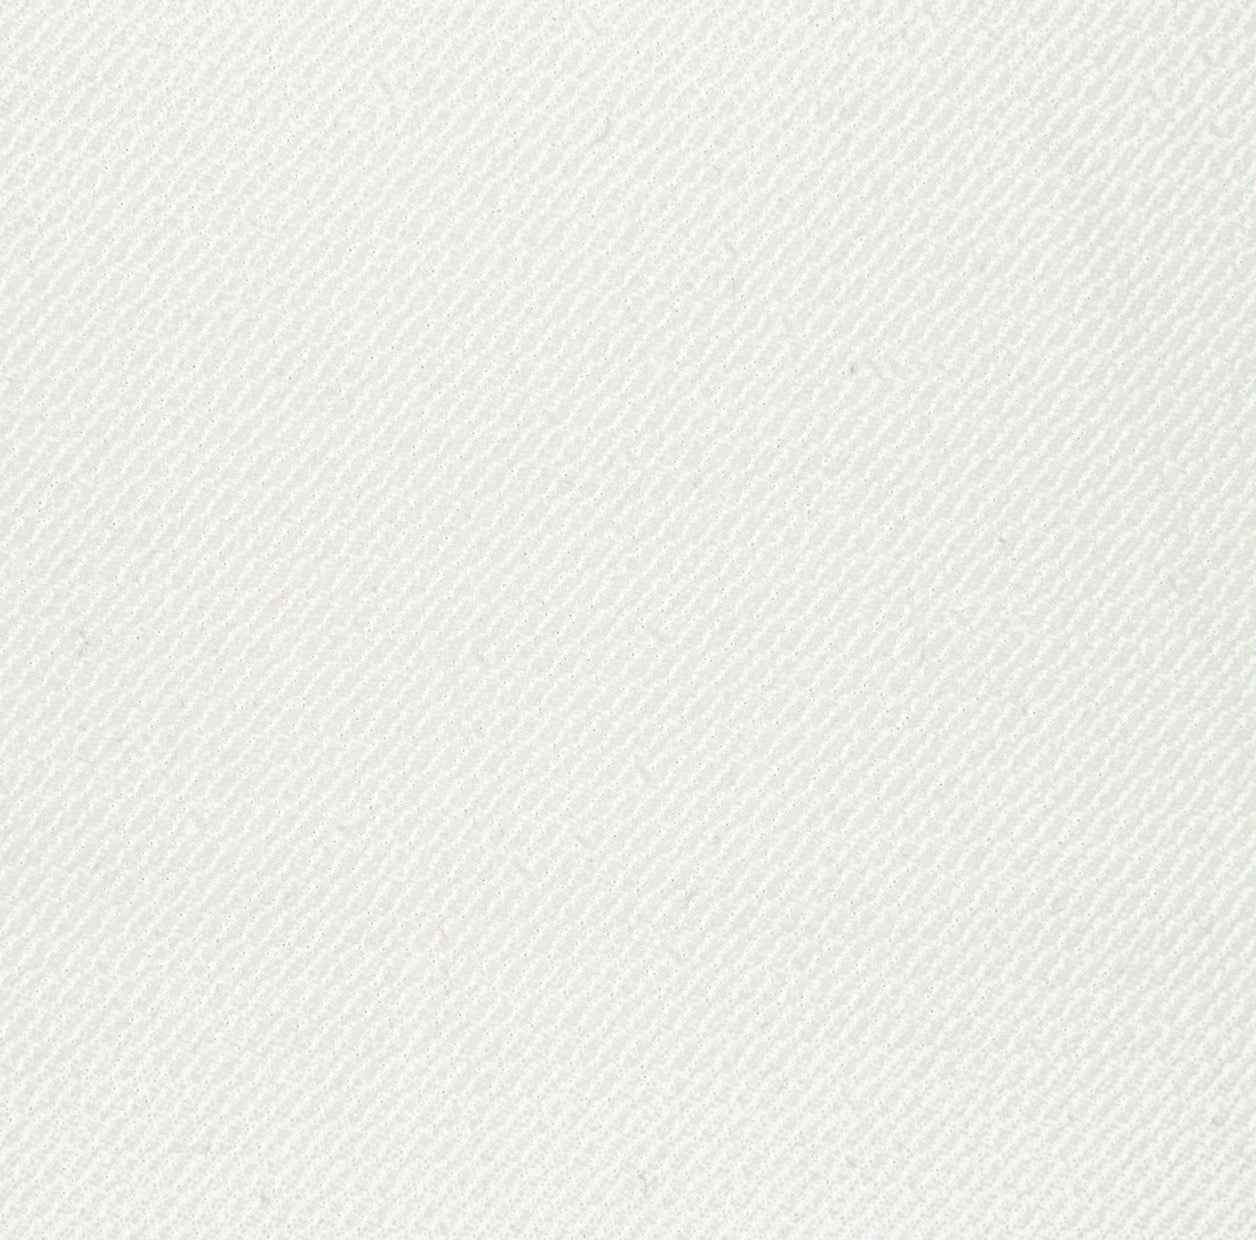 35005-12 Ivory Polyester Plain Dyed 280g/yd 54&quot; beige plain dyed polyester woven Solid Color - knit fabric - woven fabric - fabric company - fabric wholesale - fabric b2b - fabric factory - high quality fabric - hong kong fabric - fabric hk - acetate fabric - cotton fabric - linen fabric - metallic fabric - nylon fabric - polyester fabric - spandex fabric - chun wing hing - cwh hk - fabric worldwide ship - 針織布 - 梳織布 - 布料公司- 布料批發 - 香港布料 - 秦榮興